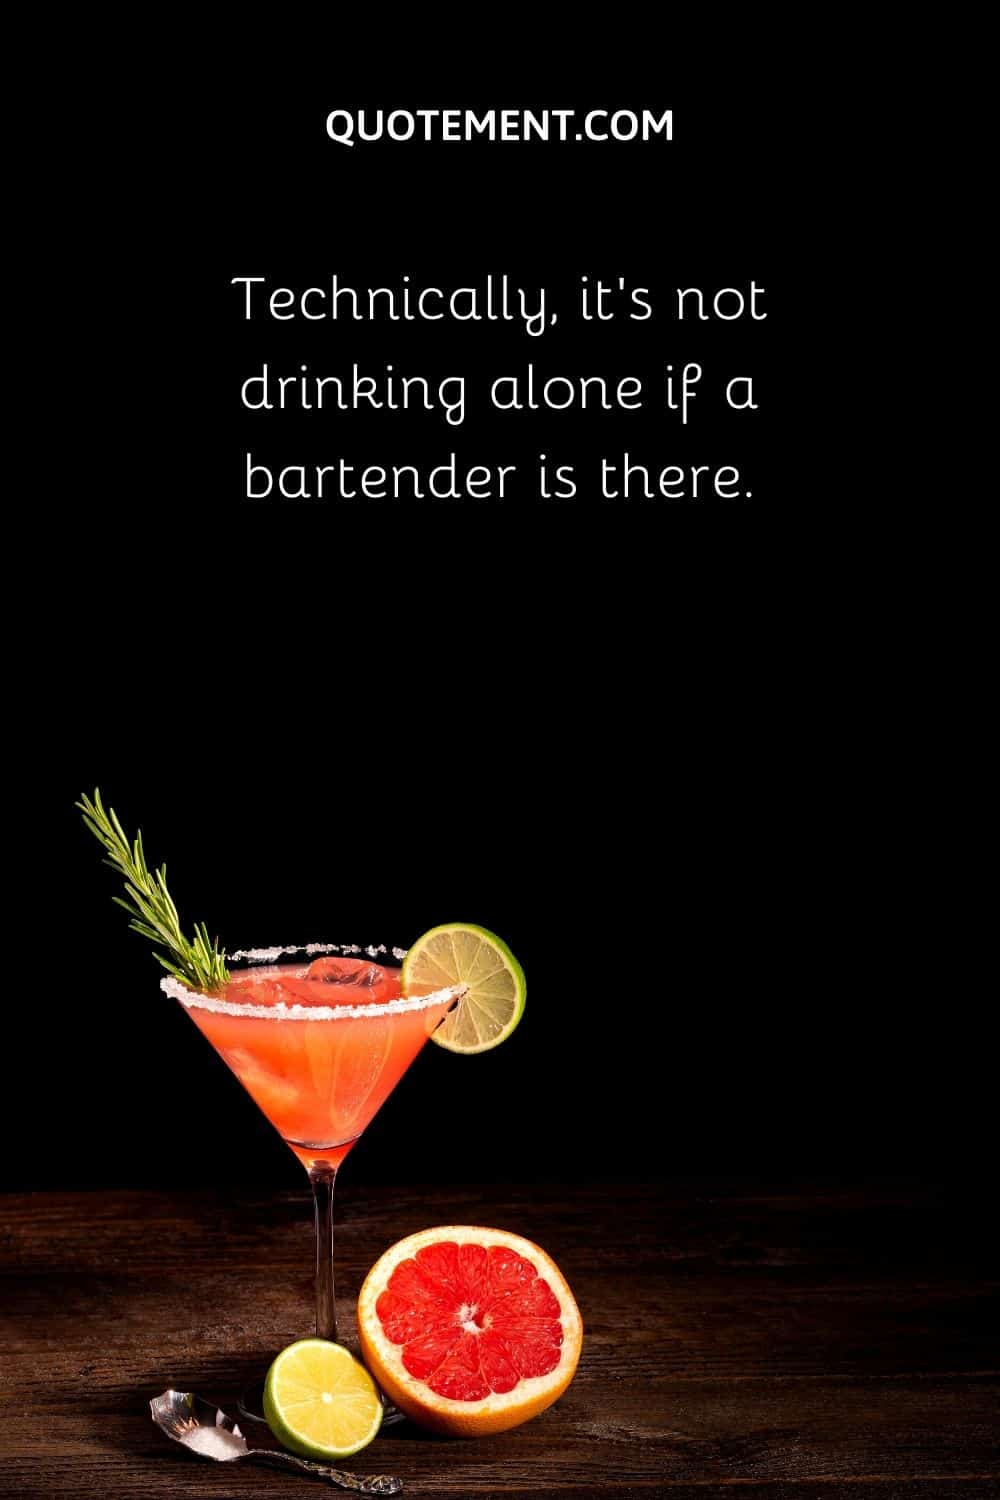 Technically, it’s not drinking alone if a bartender is there.